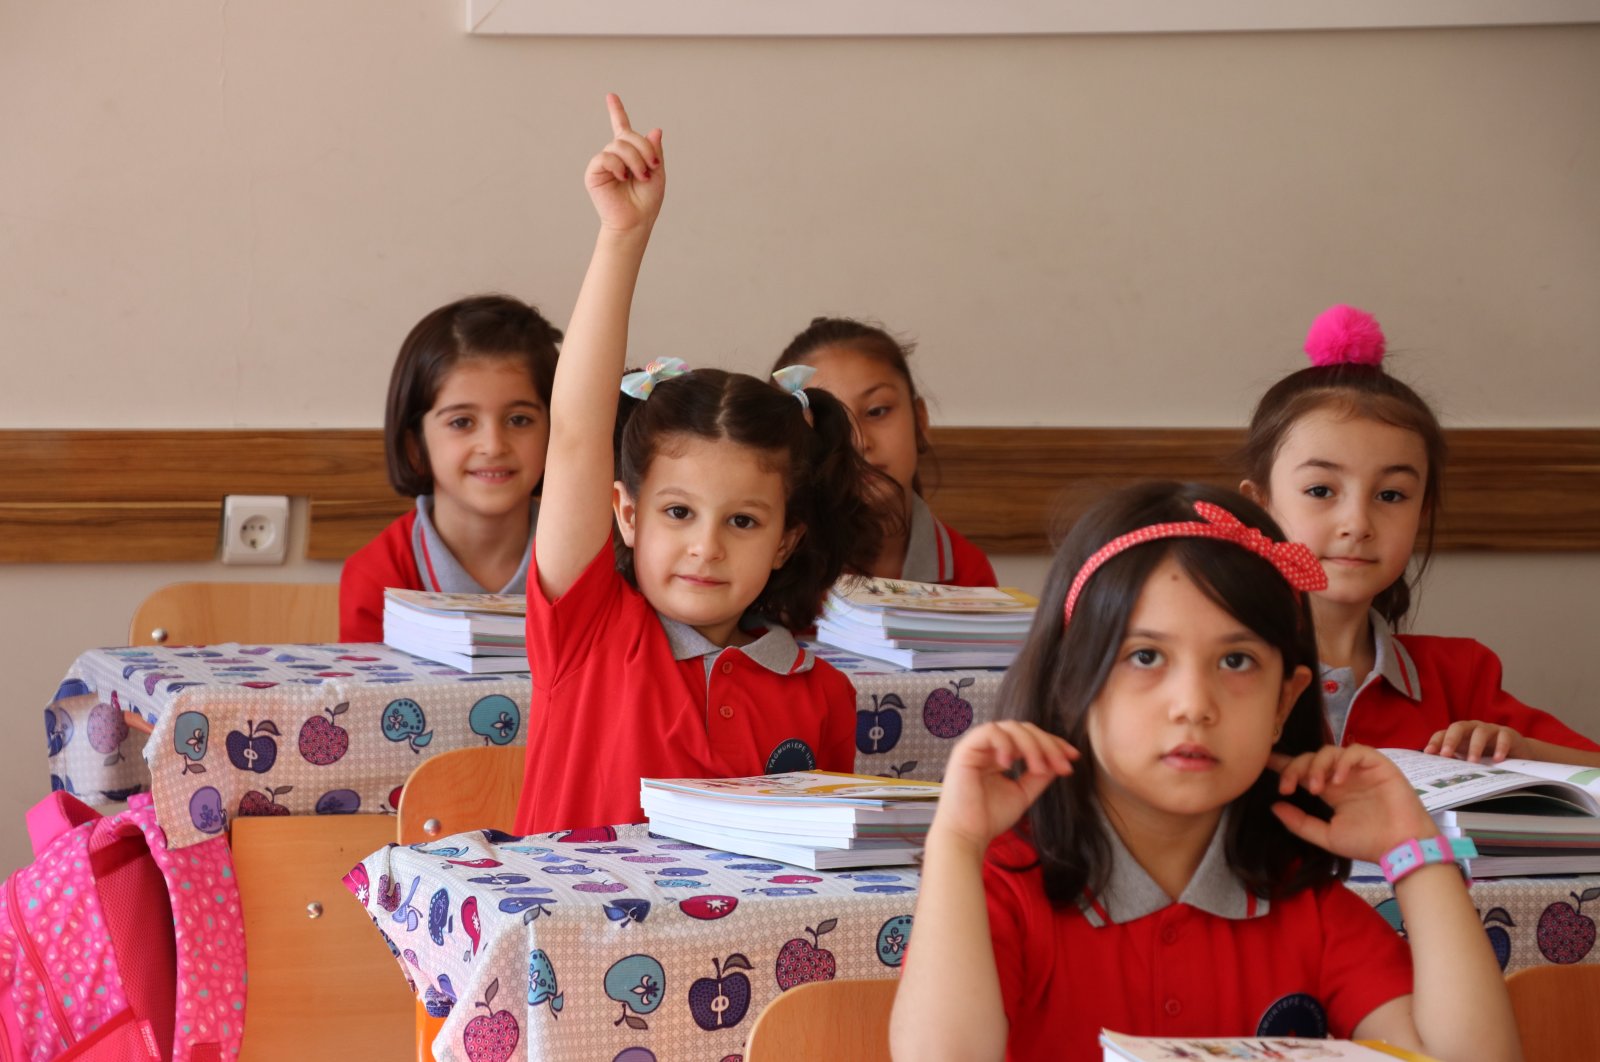 Turkish experts warn families against infections as children return to school